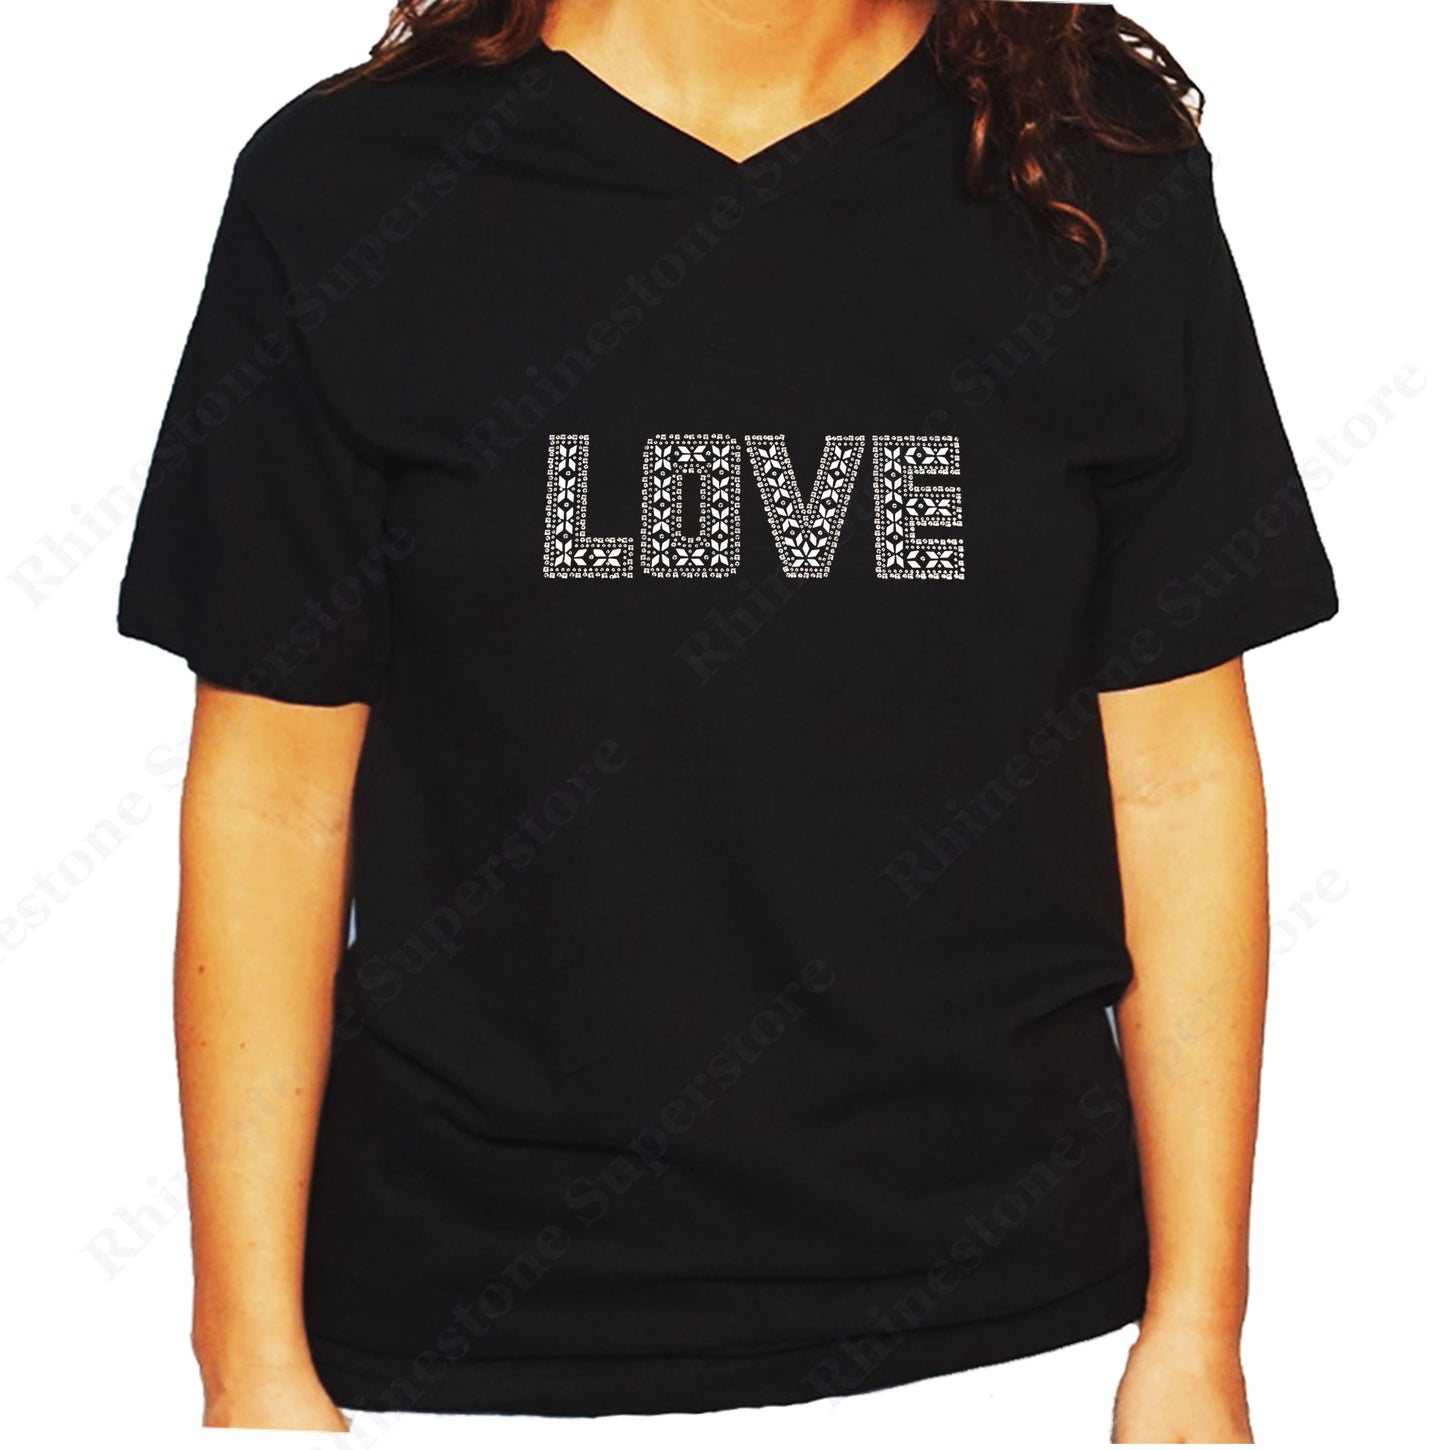 Women's / Unisex T-Shirt with Silver Love in Rhinestuds